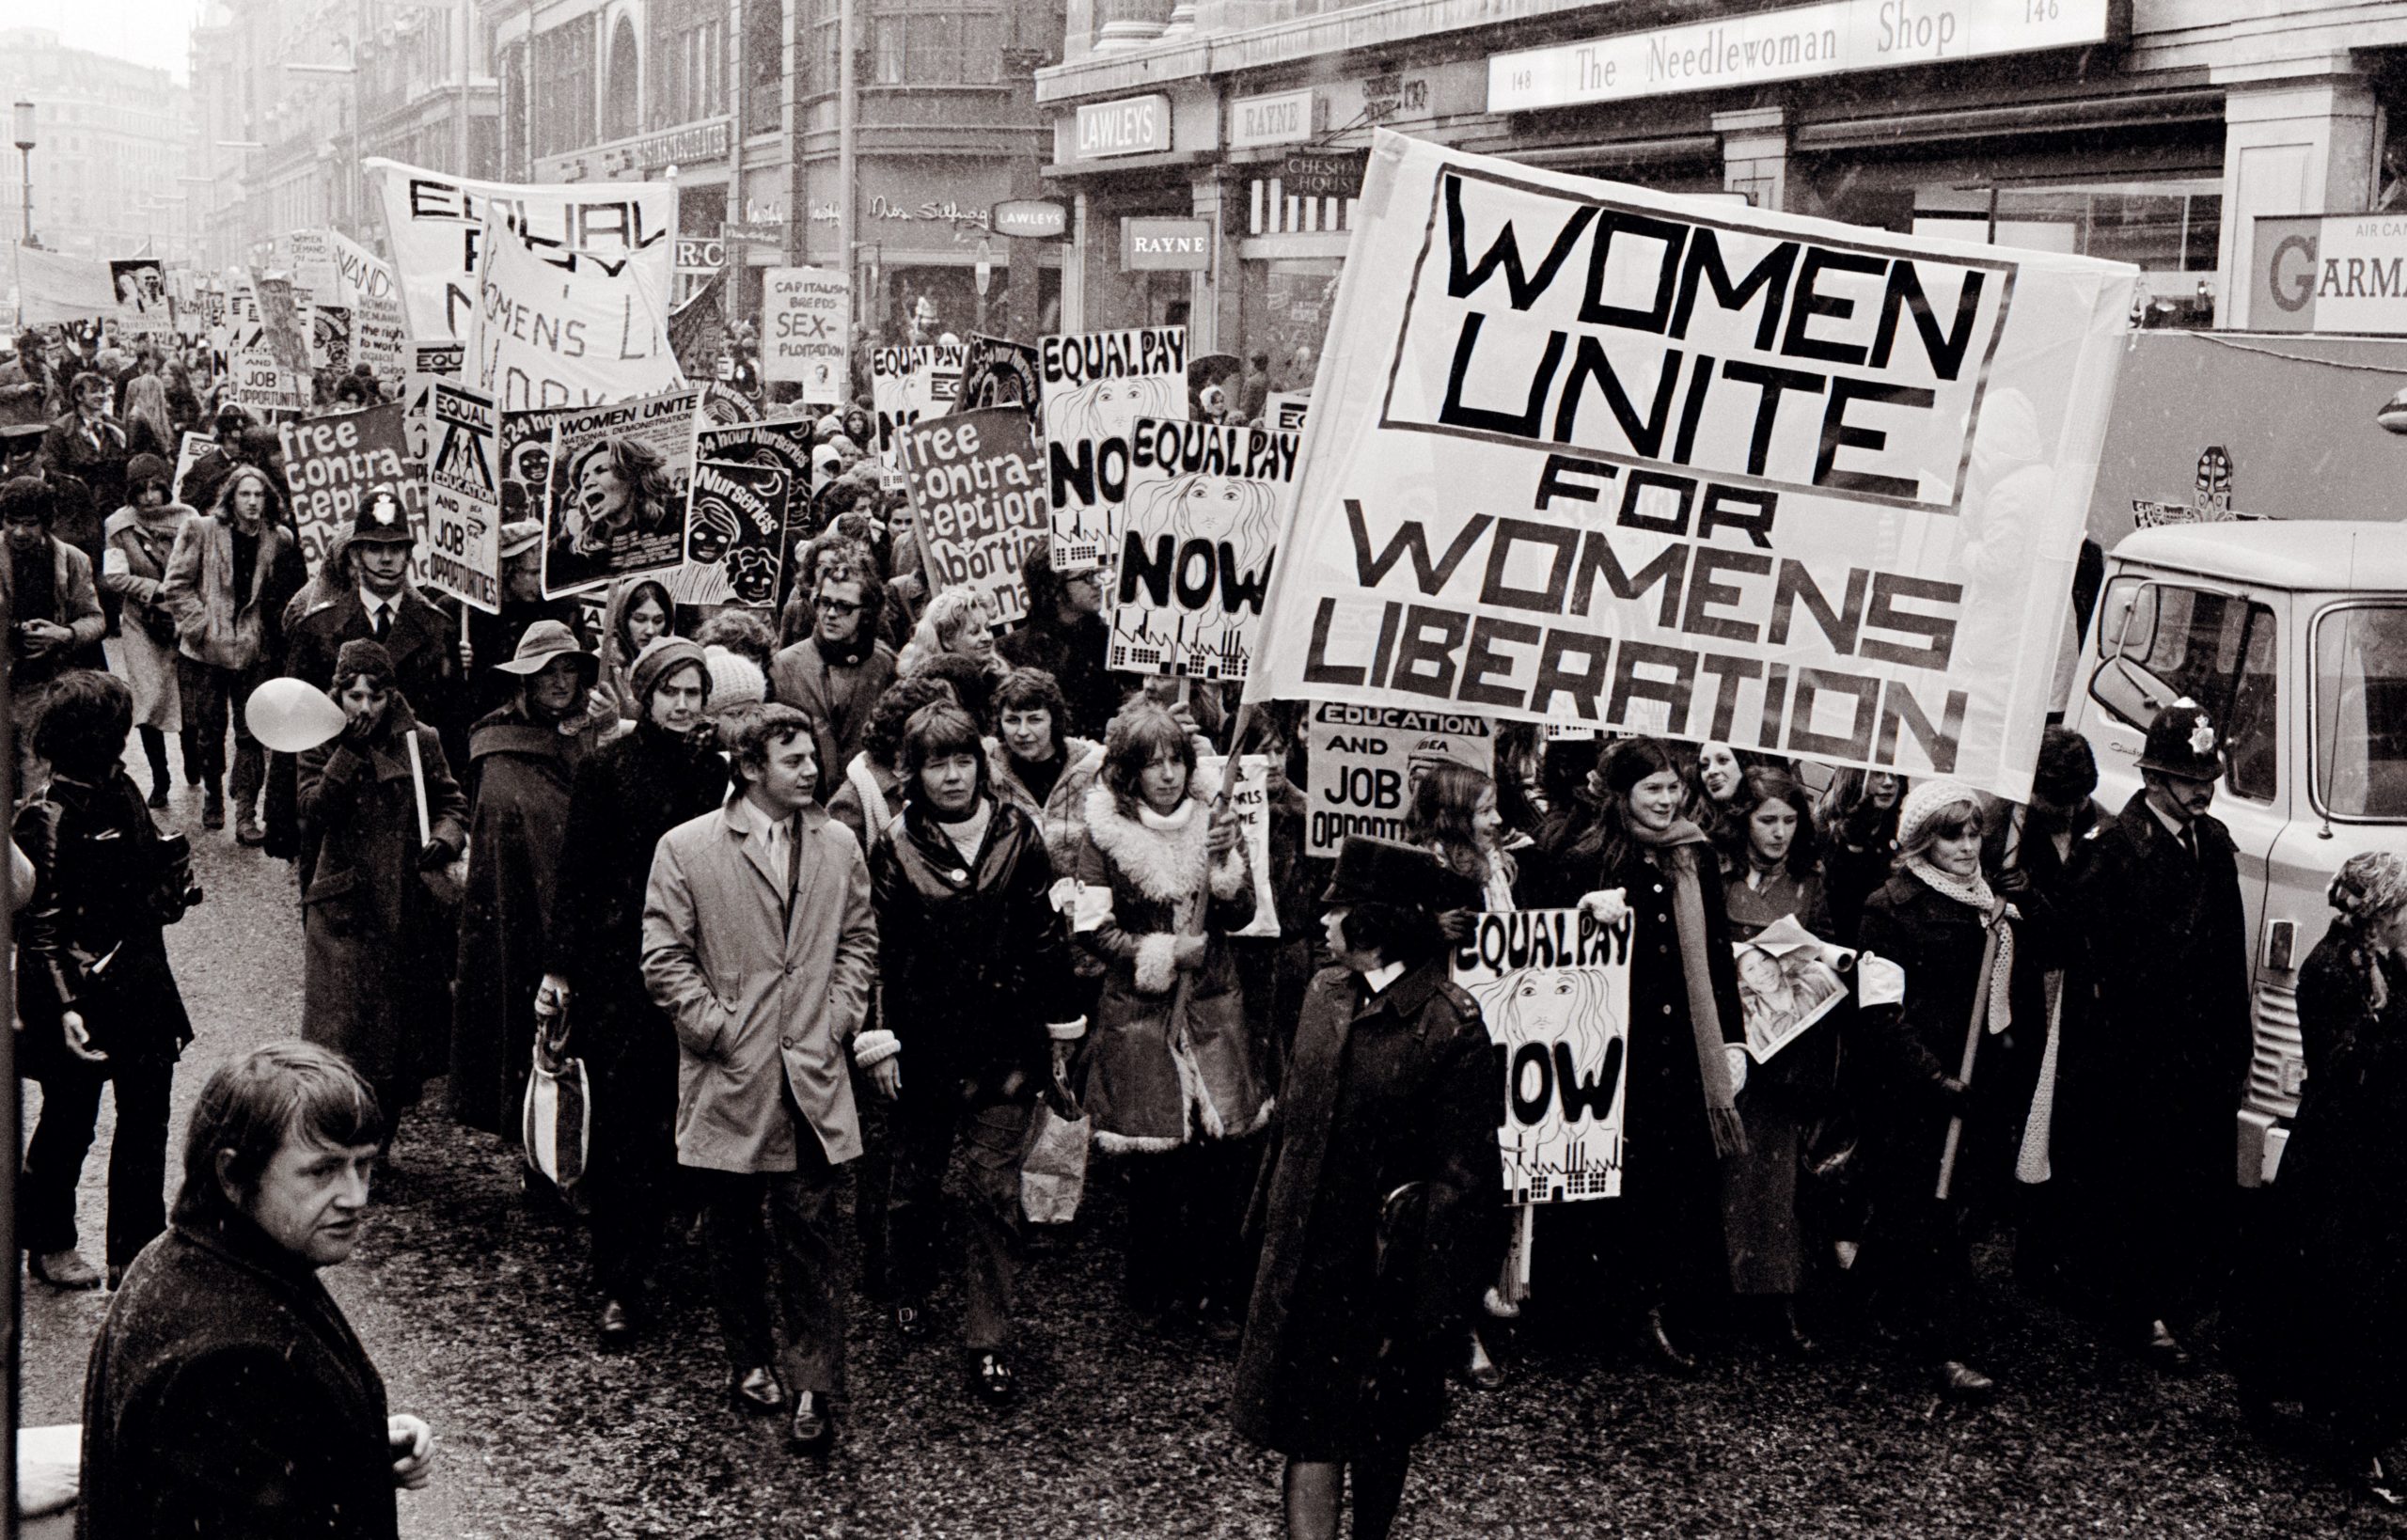 A Women’s Liberation march hits the streets
in London in 1971